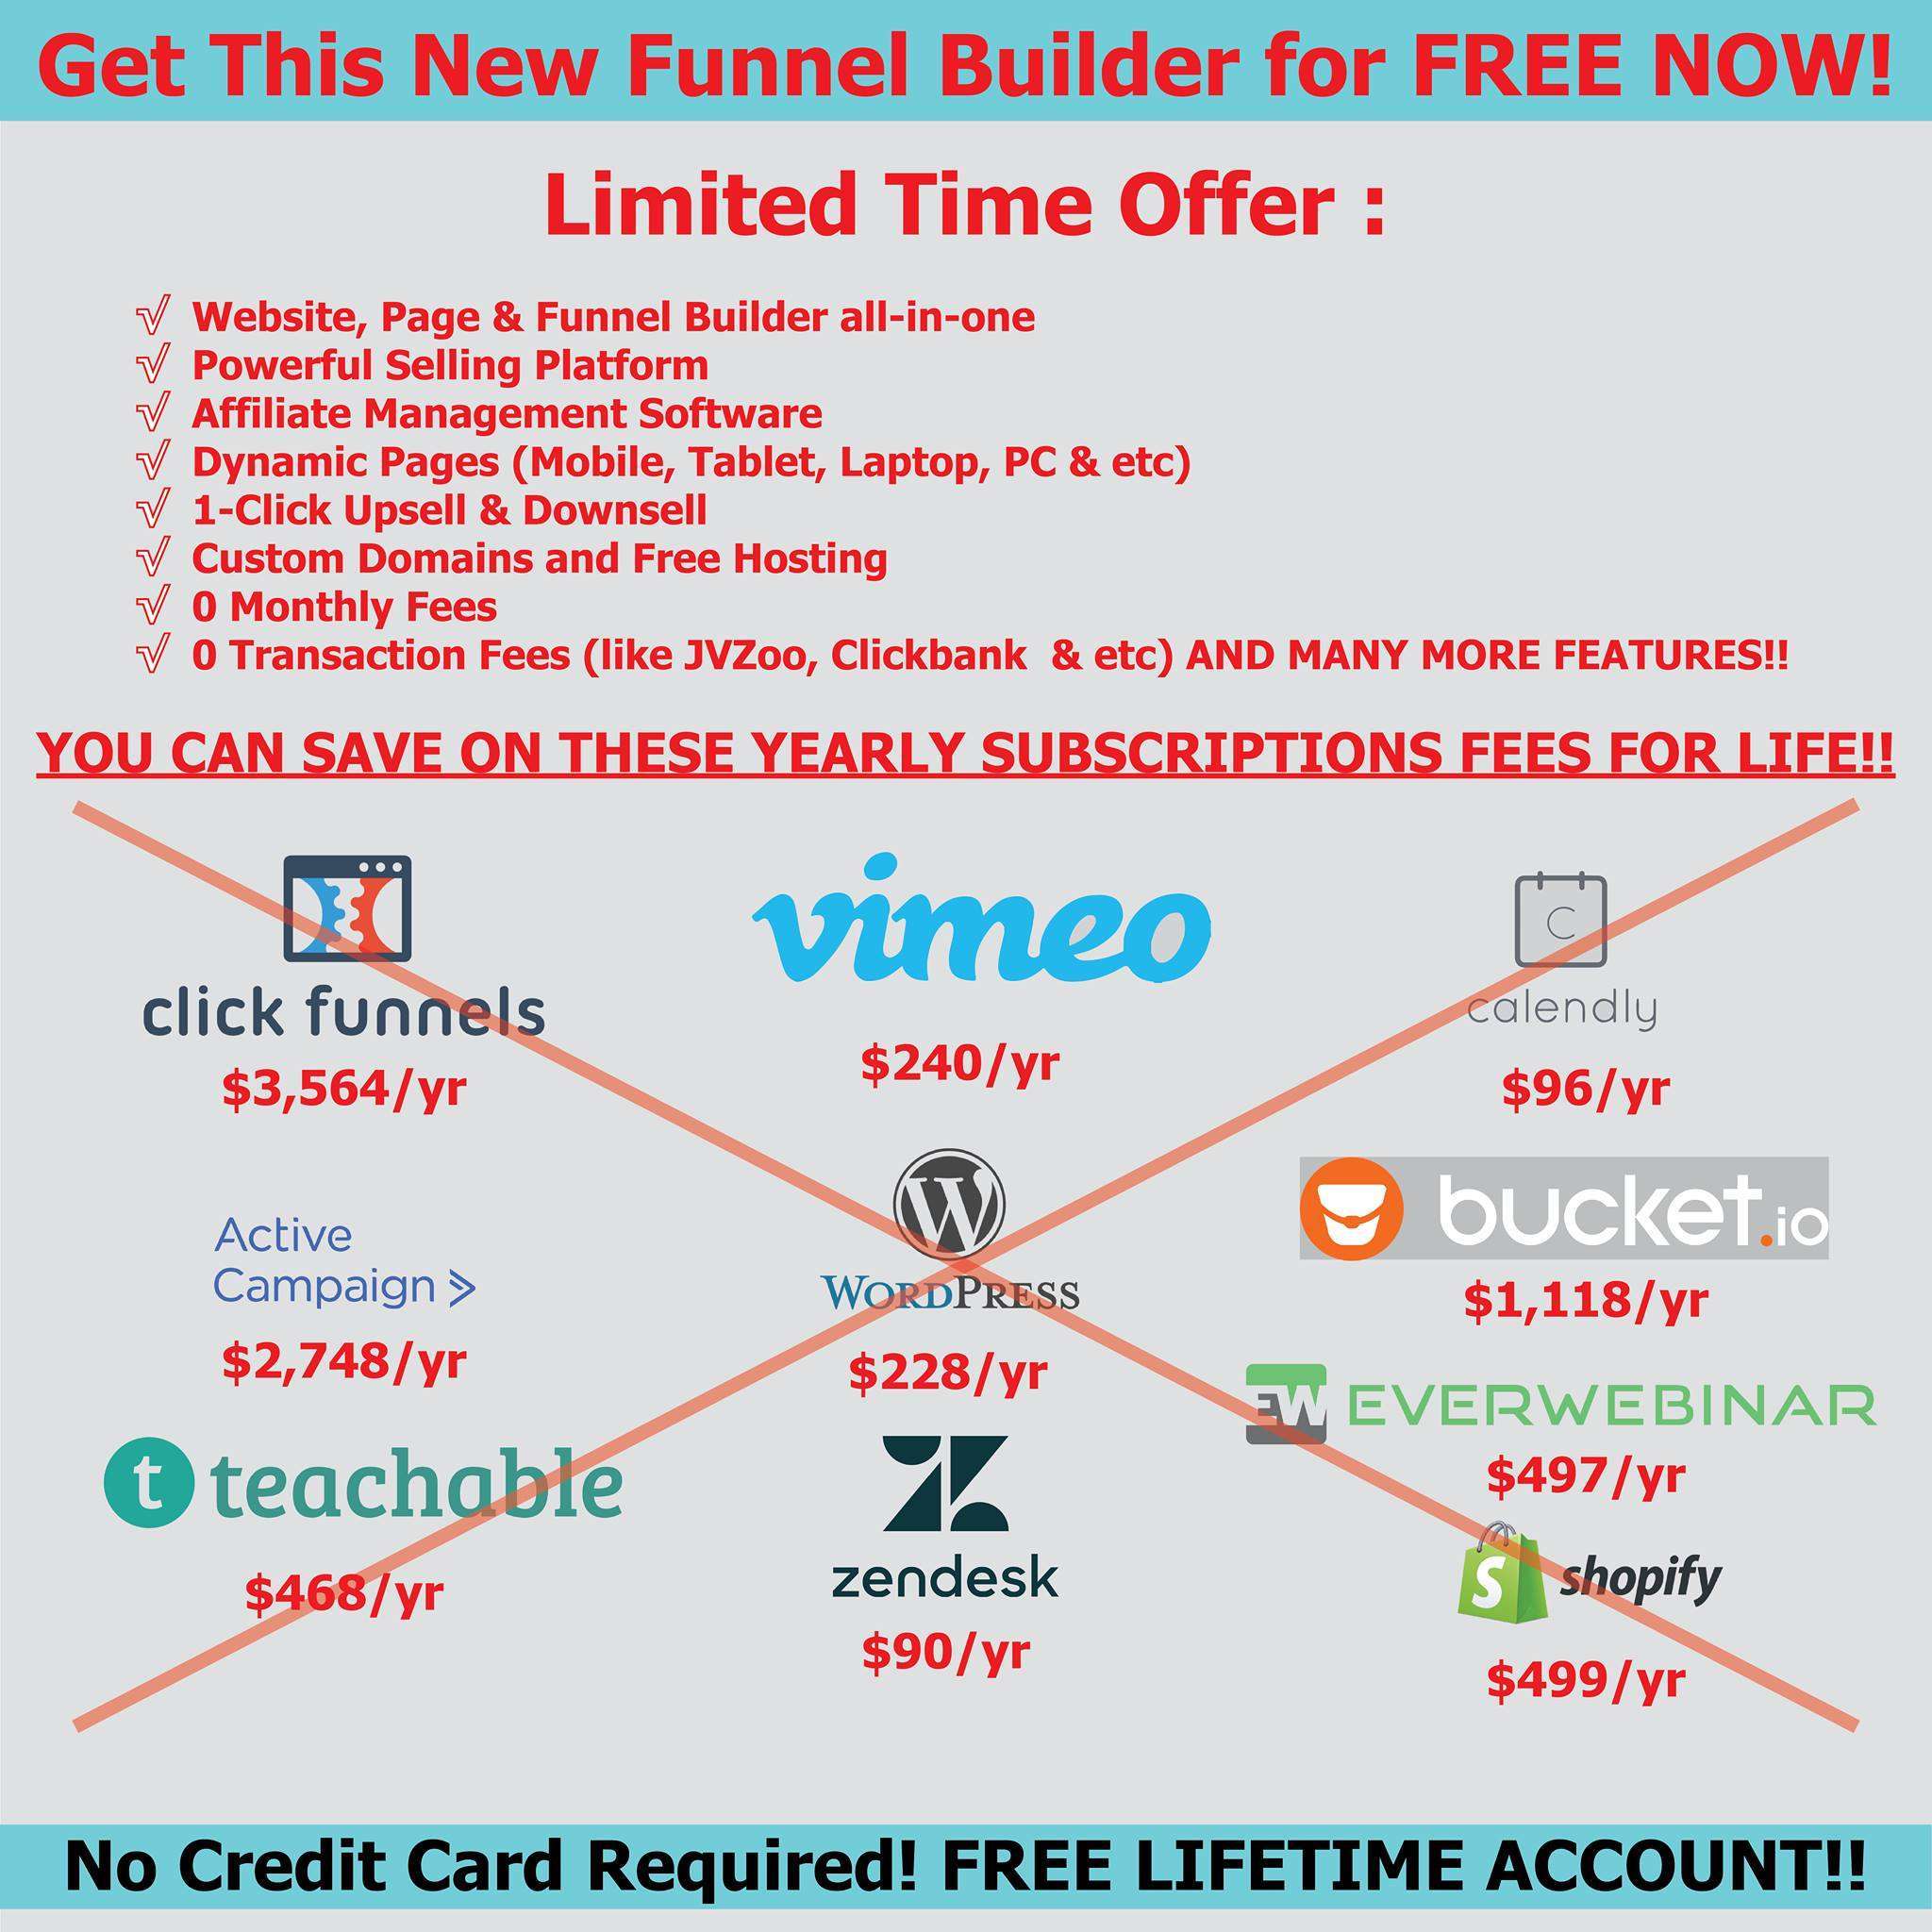 The Ultimate Guide To Groovefunnels Review - Should You Get It? - Business - Inter ...